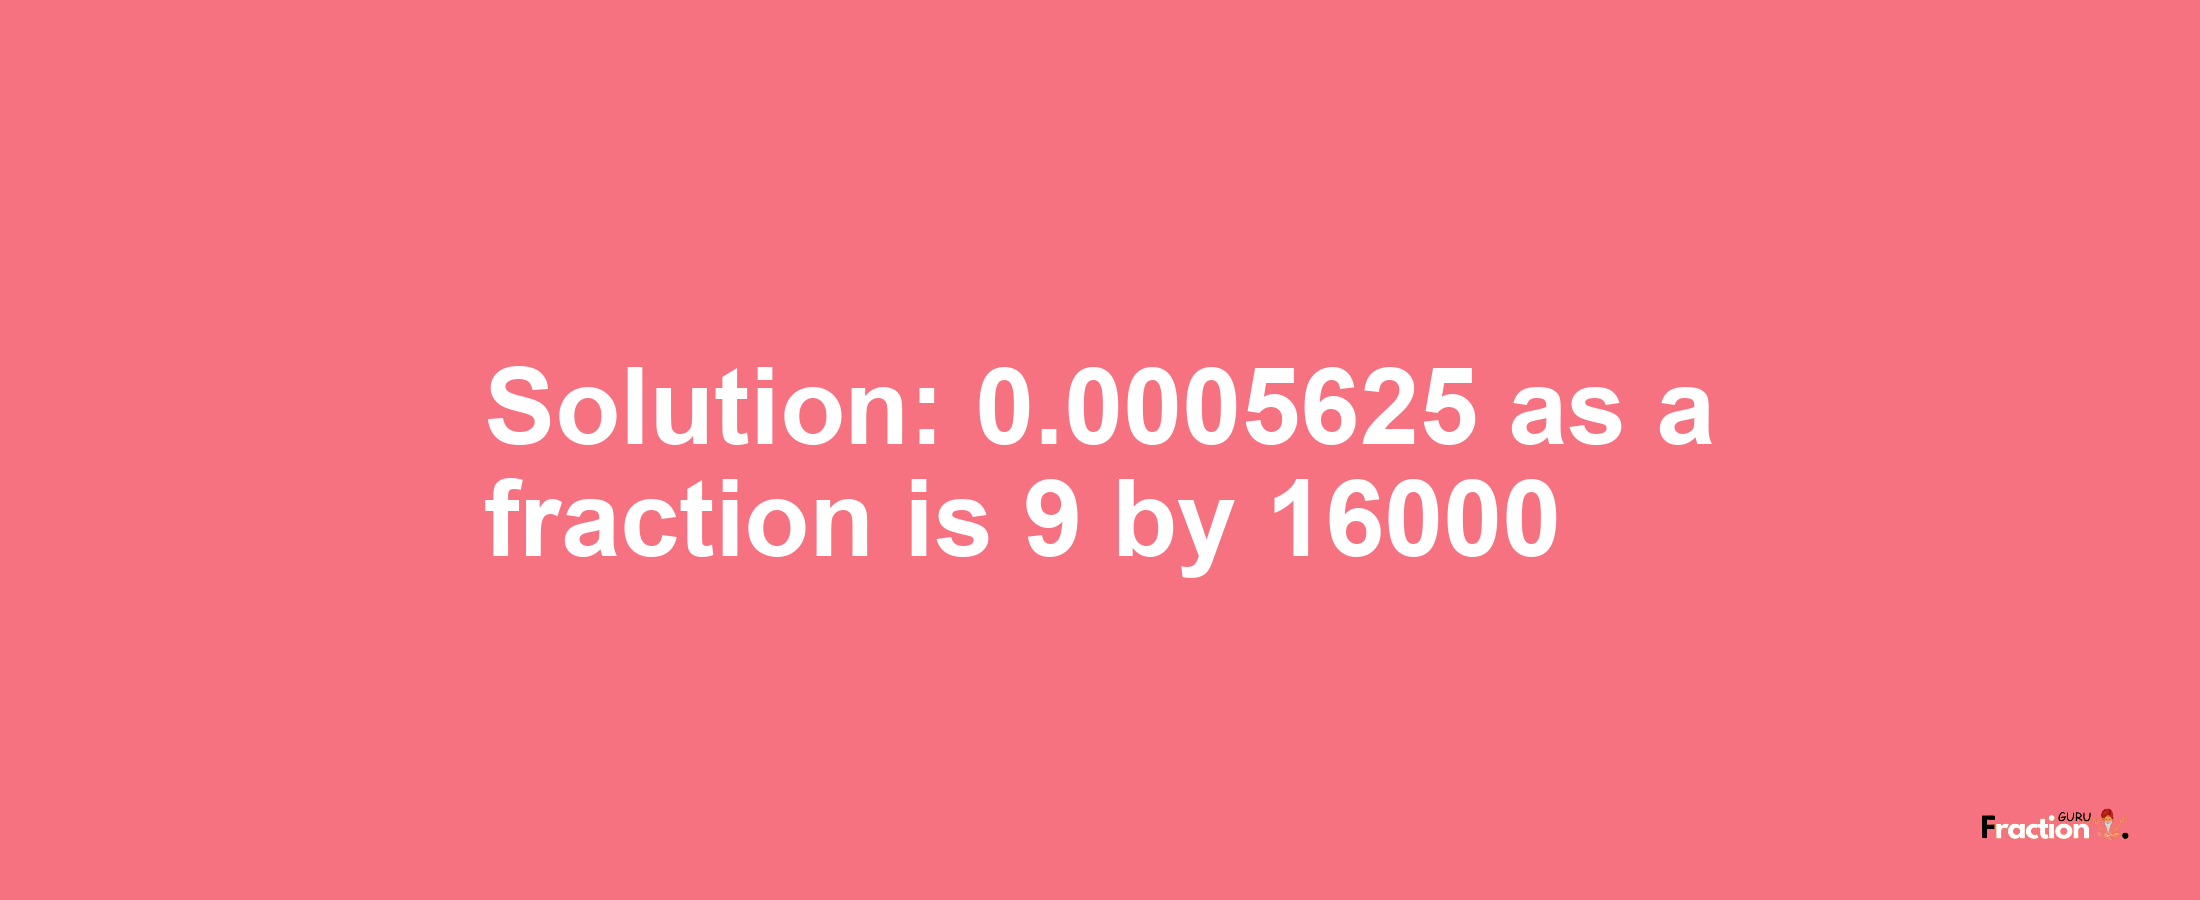 Solution:0.0005625 as a fraction is 9/16000